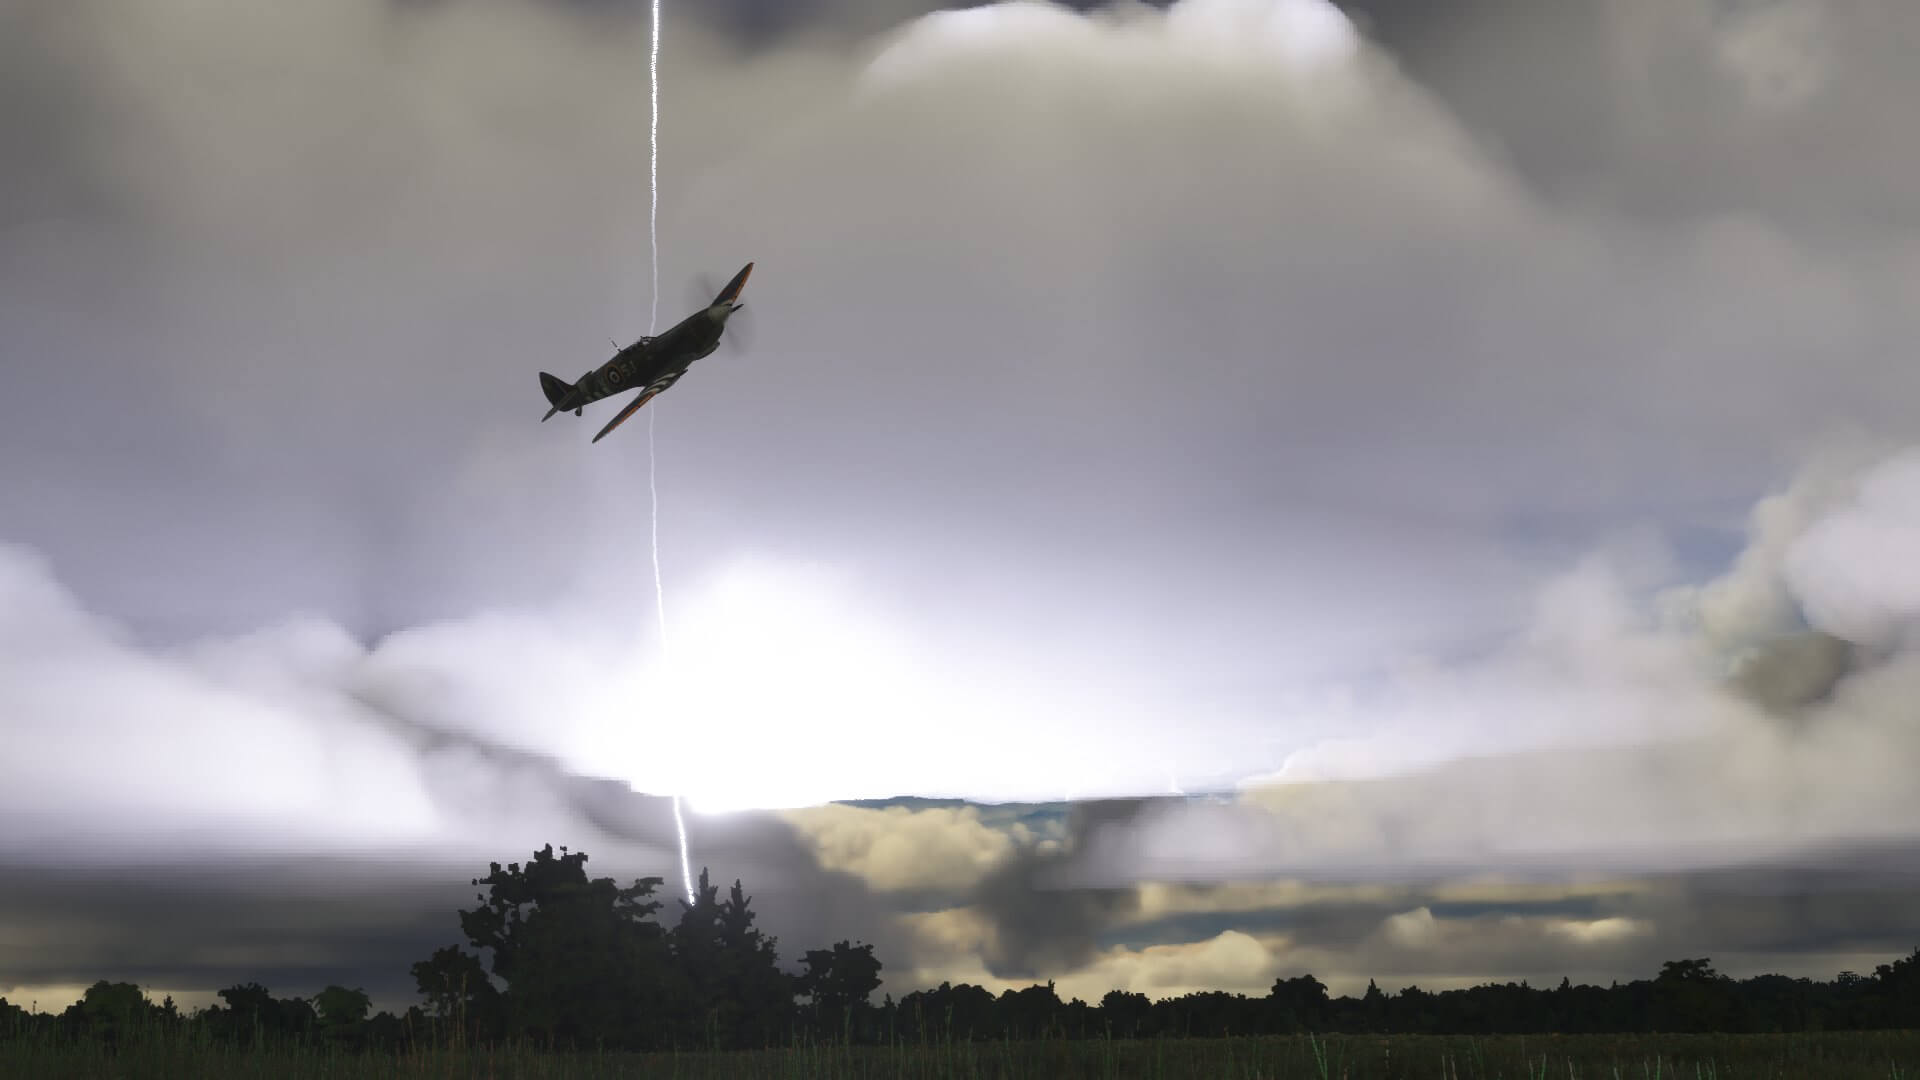 A World War 2 fighter banks to the right passing low over flat fields, as lightning erupts from overcast clouds above.